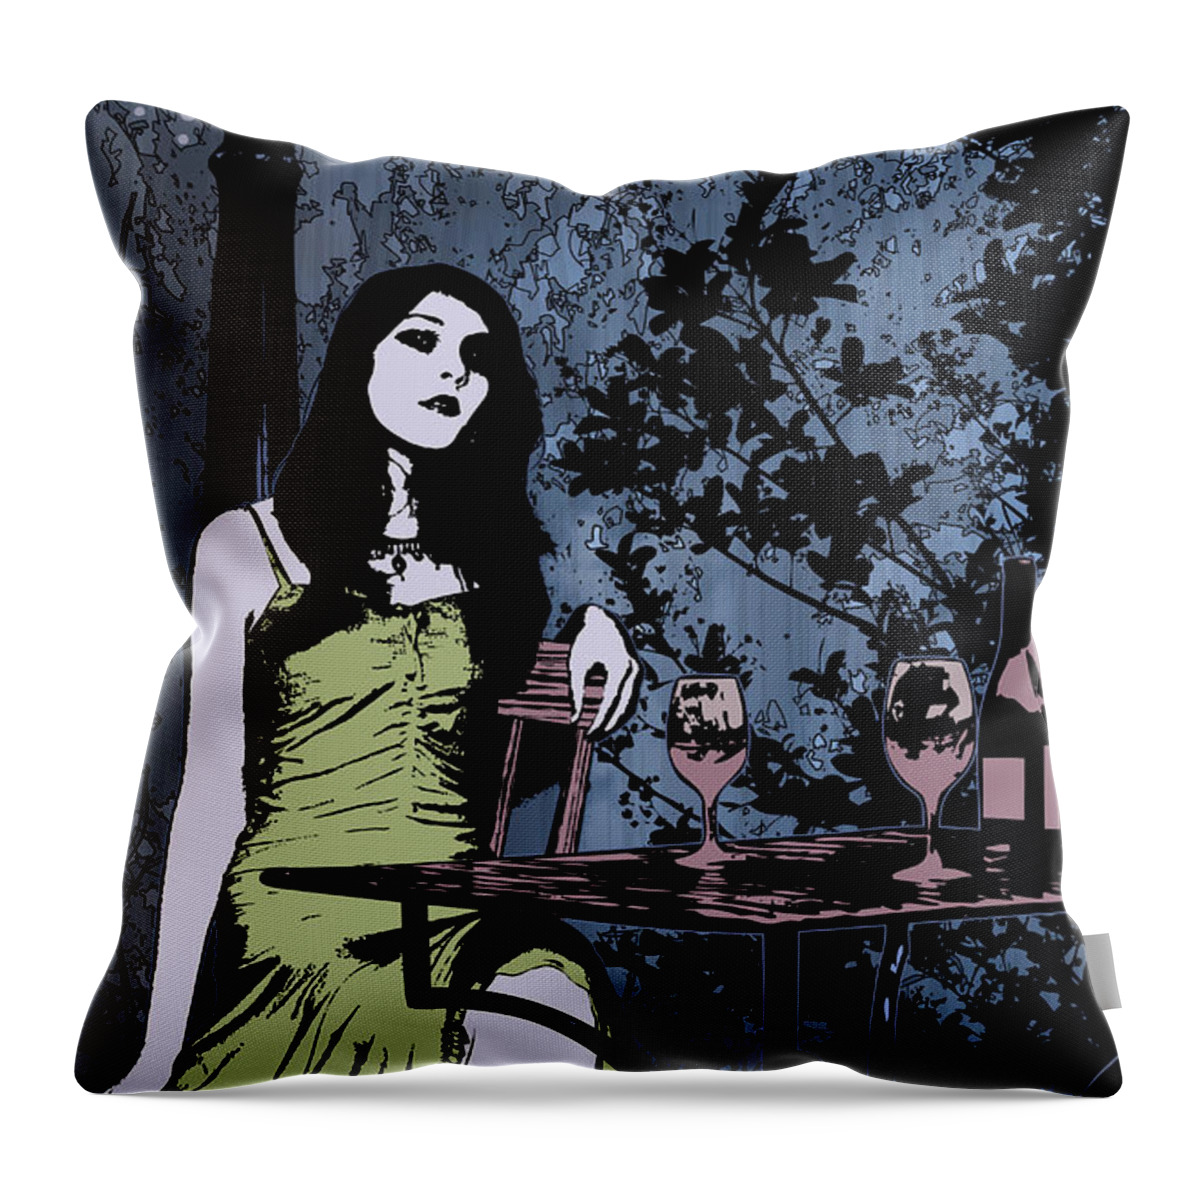 Jason Casteel Throw Pillow featuring the digital art Out At Night by Jason Casteel